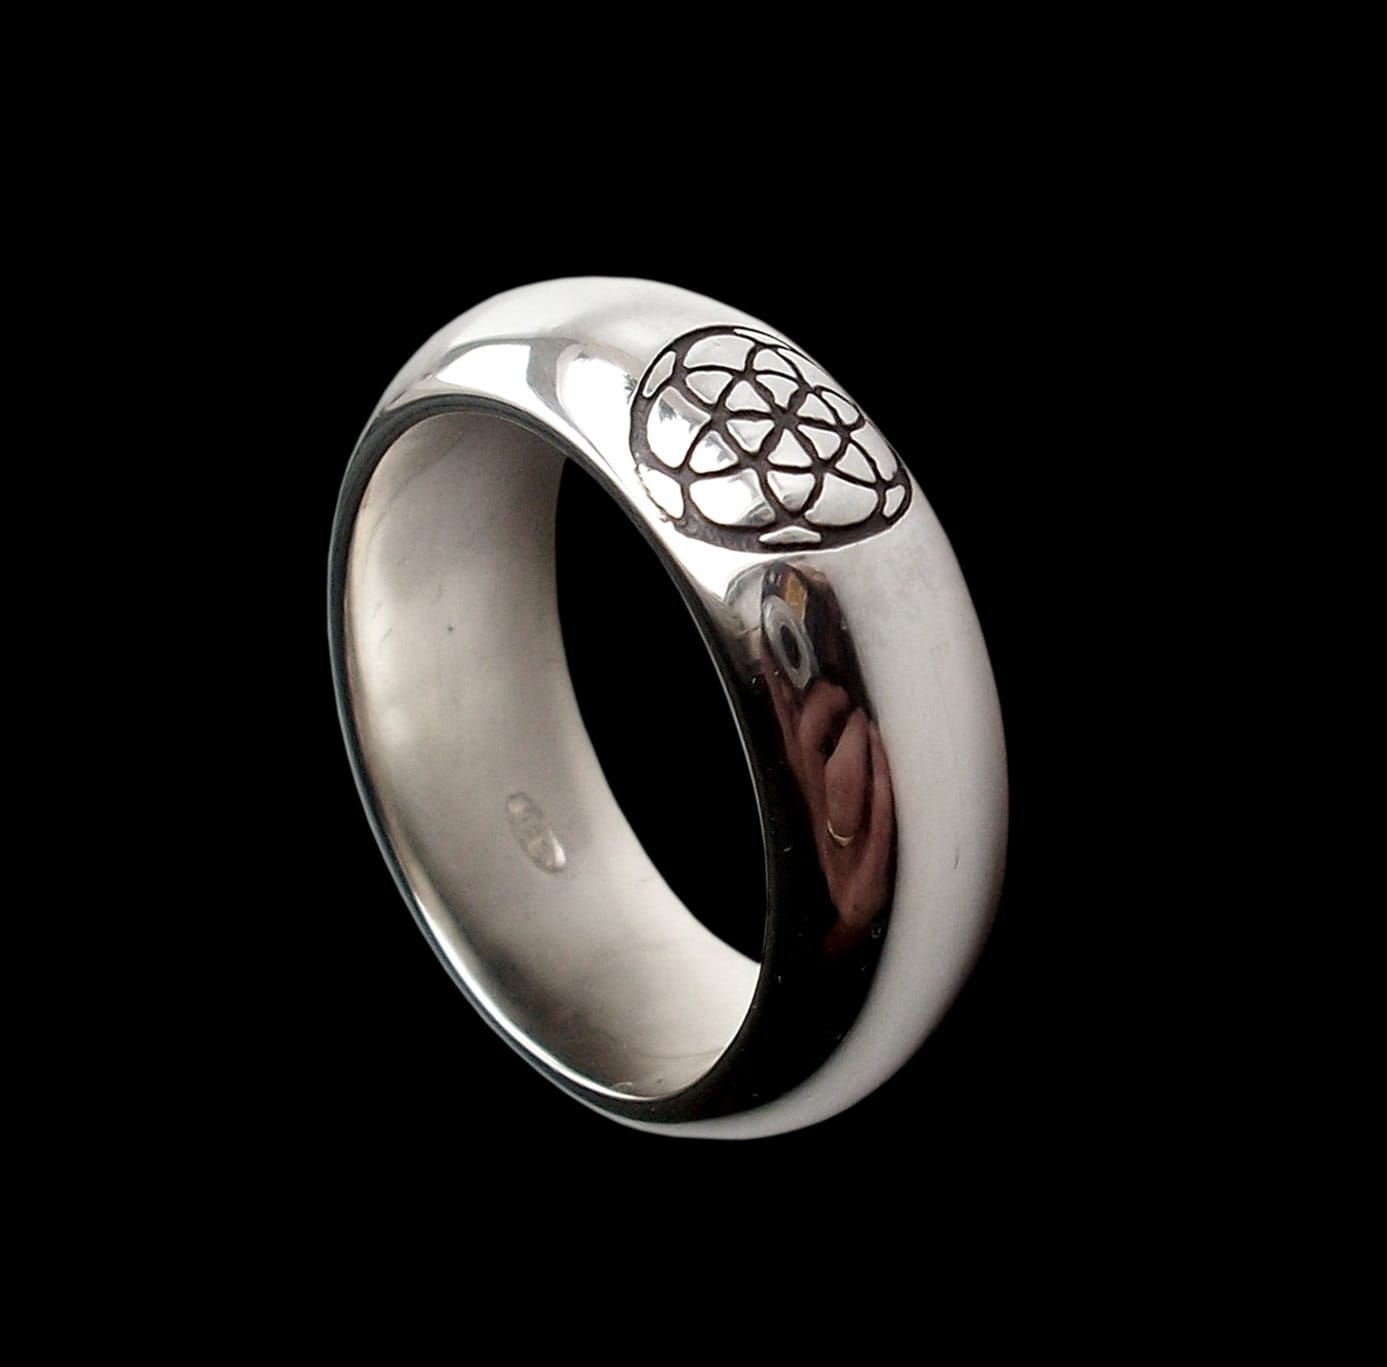 Seed of life ring - Sterling Silver Seed of Life ring  - All sizes - Creation Symbol